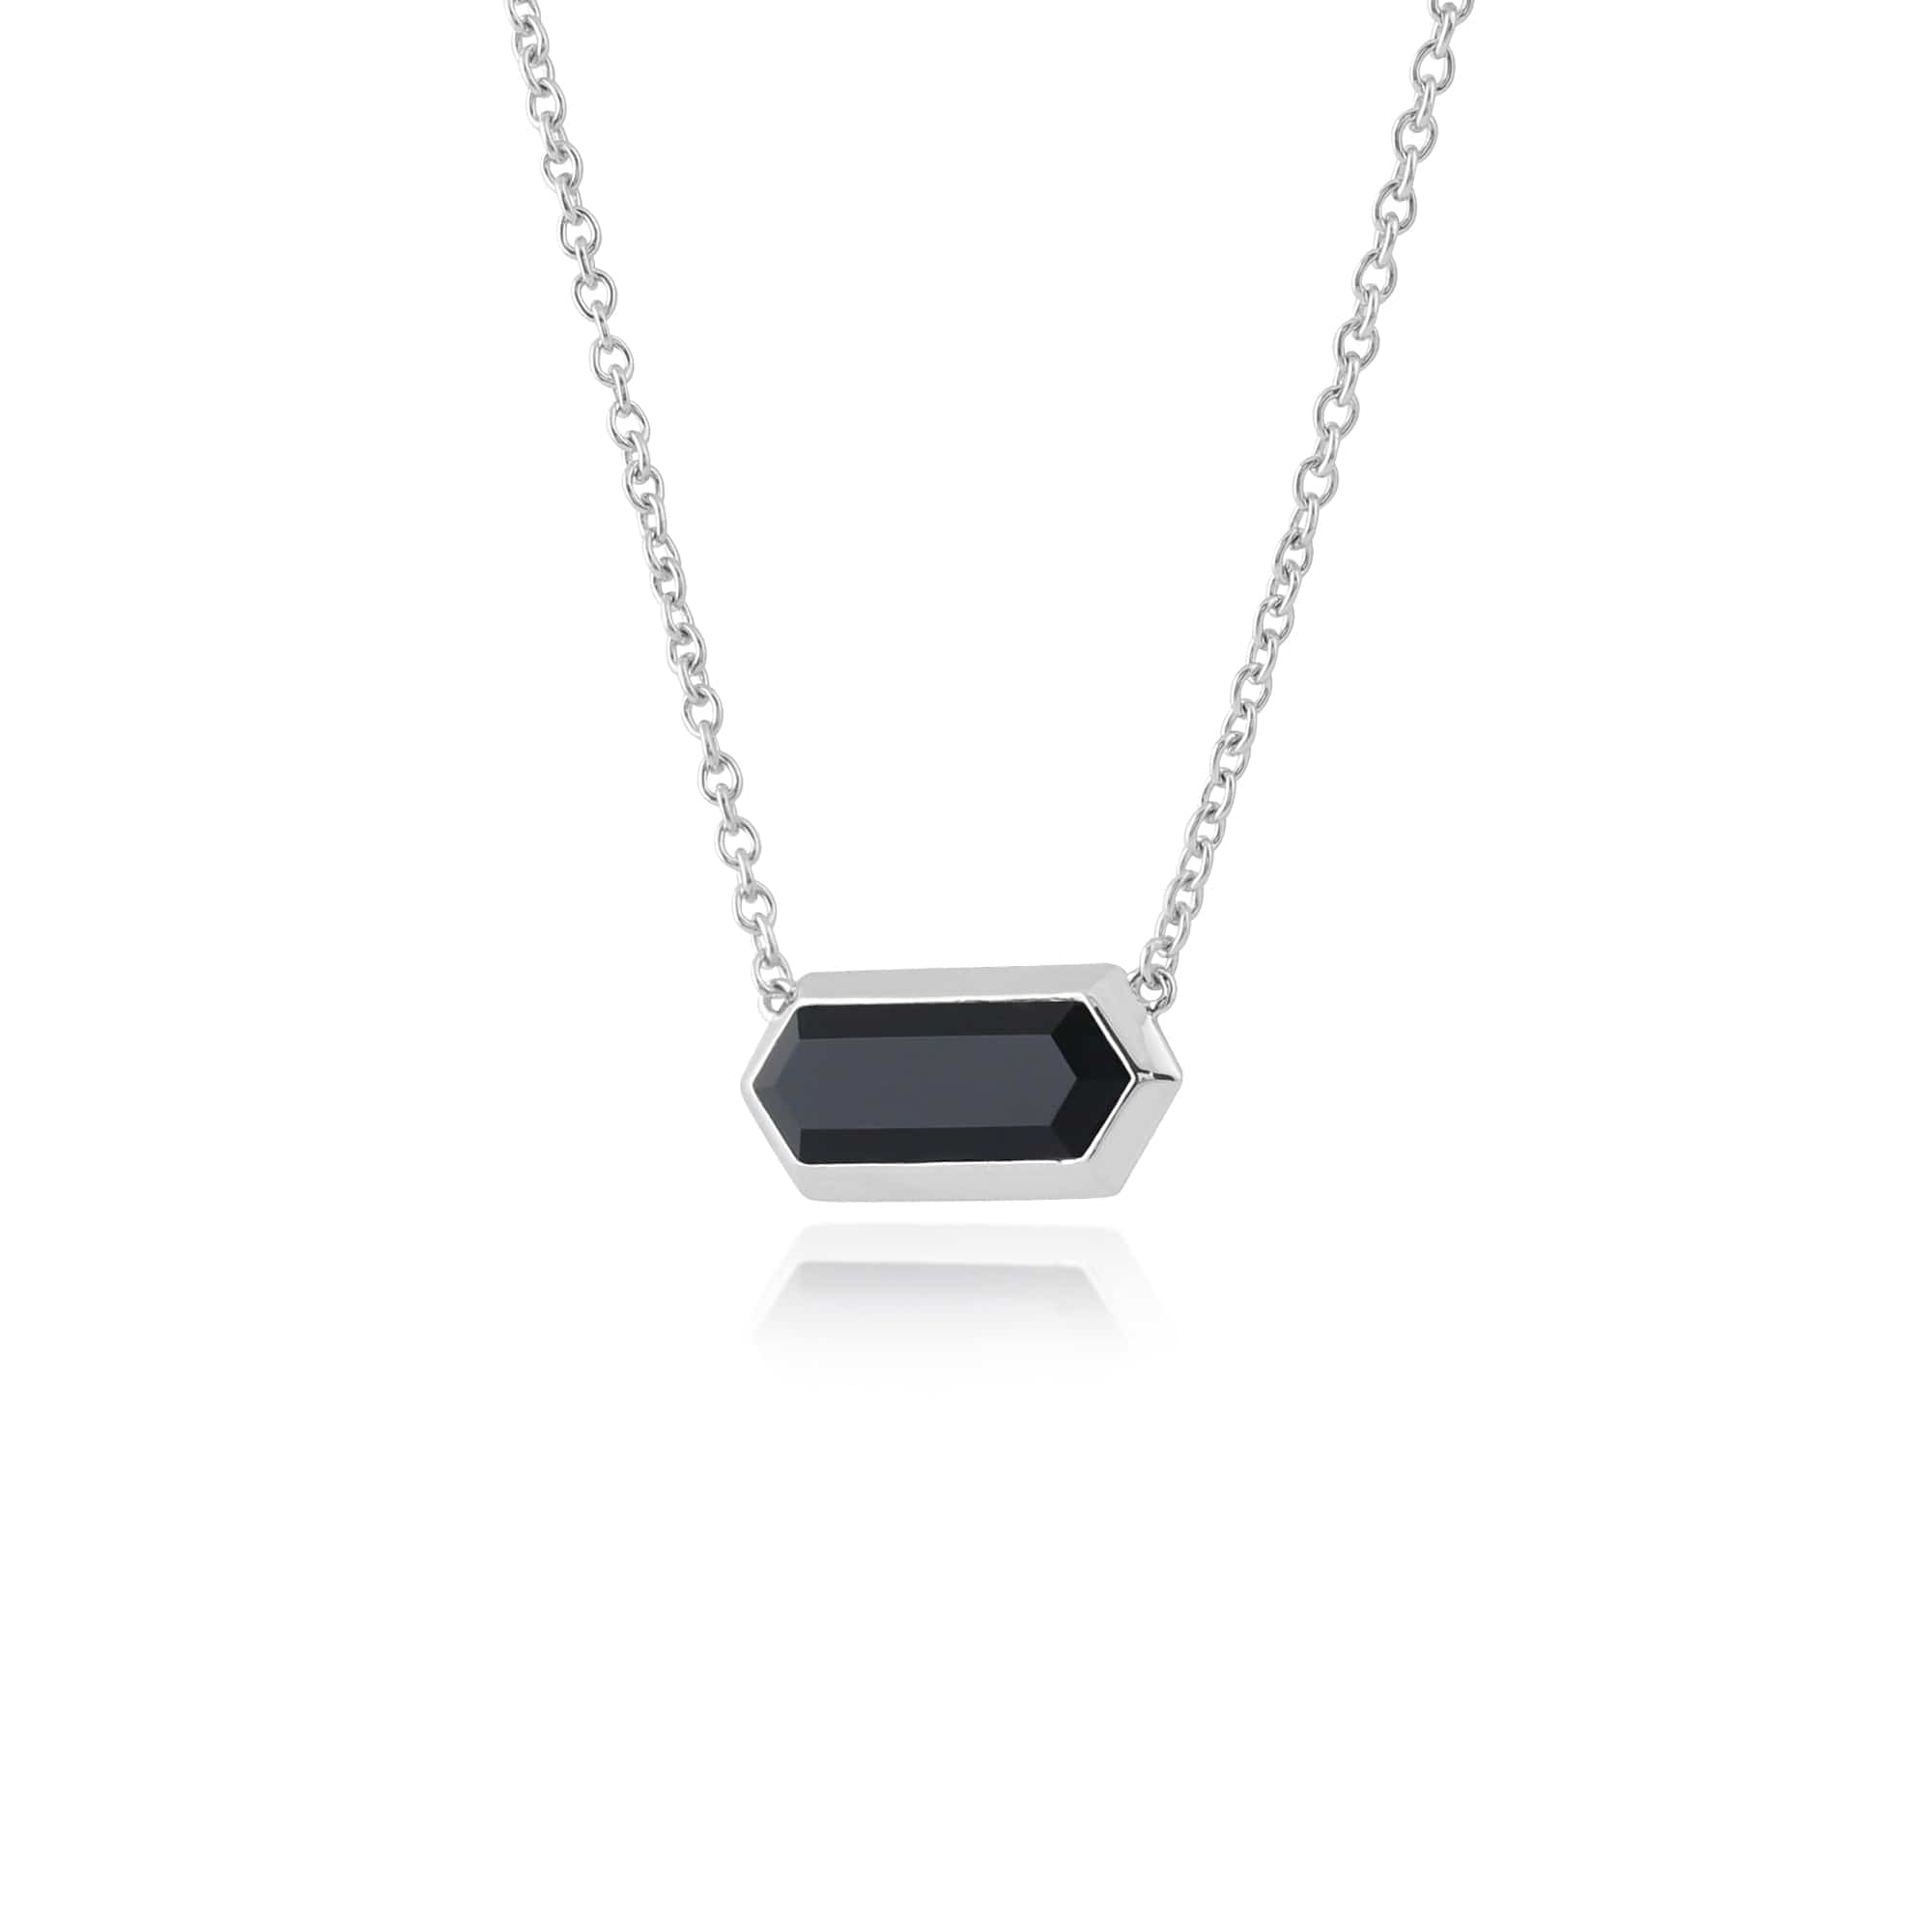 271N012501925 Geometric Hexagon Black Onyx Prism Necklace in 925 Sterling Silver 2